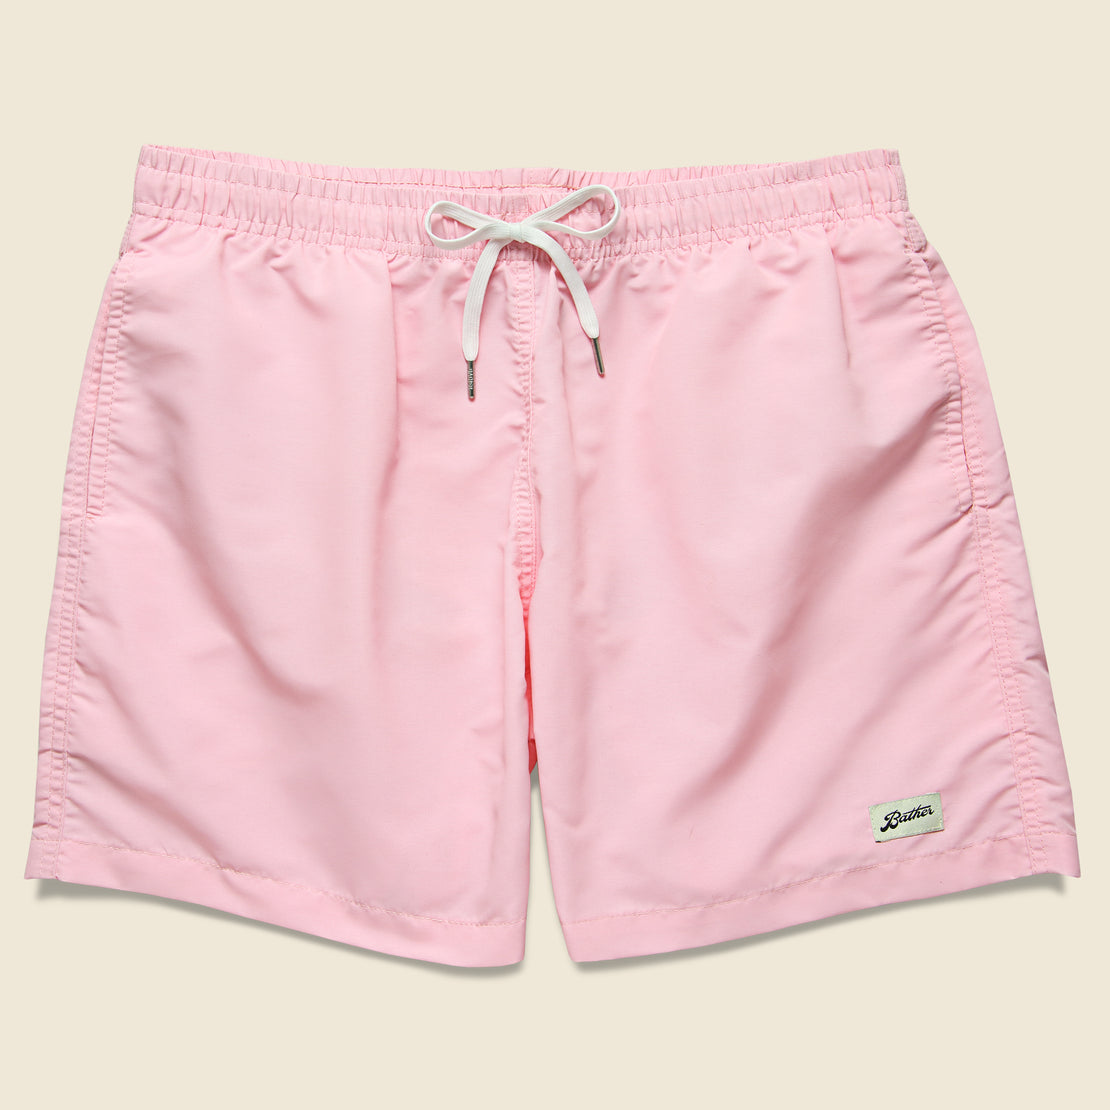 Bather Trunk Co. Bather - Solid Swim Trunk, SS19